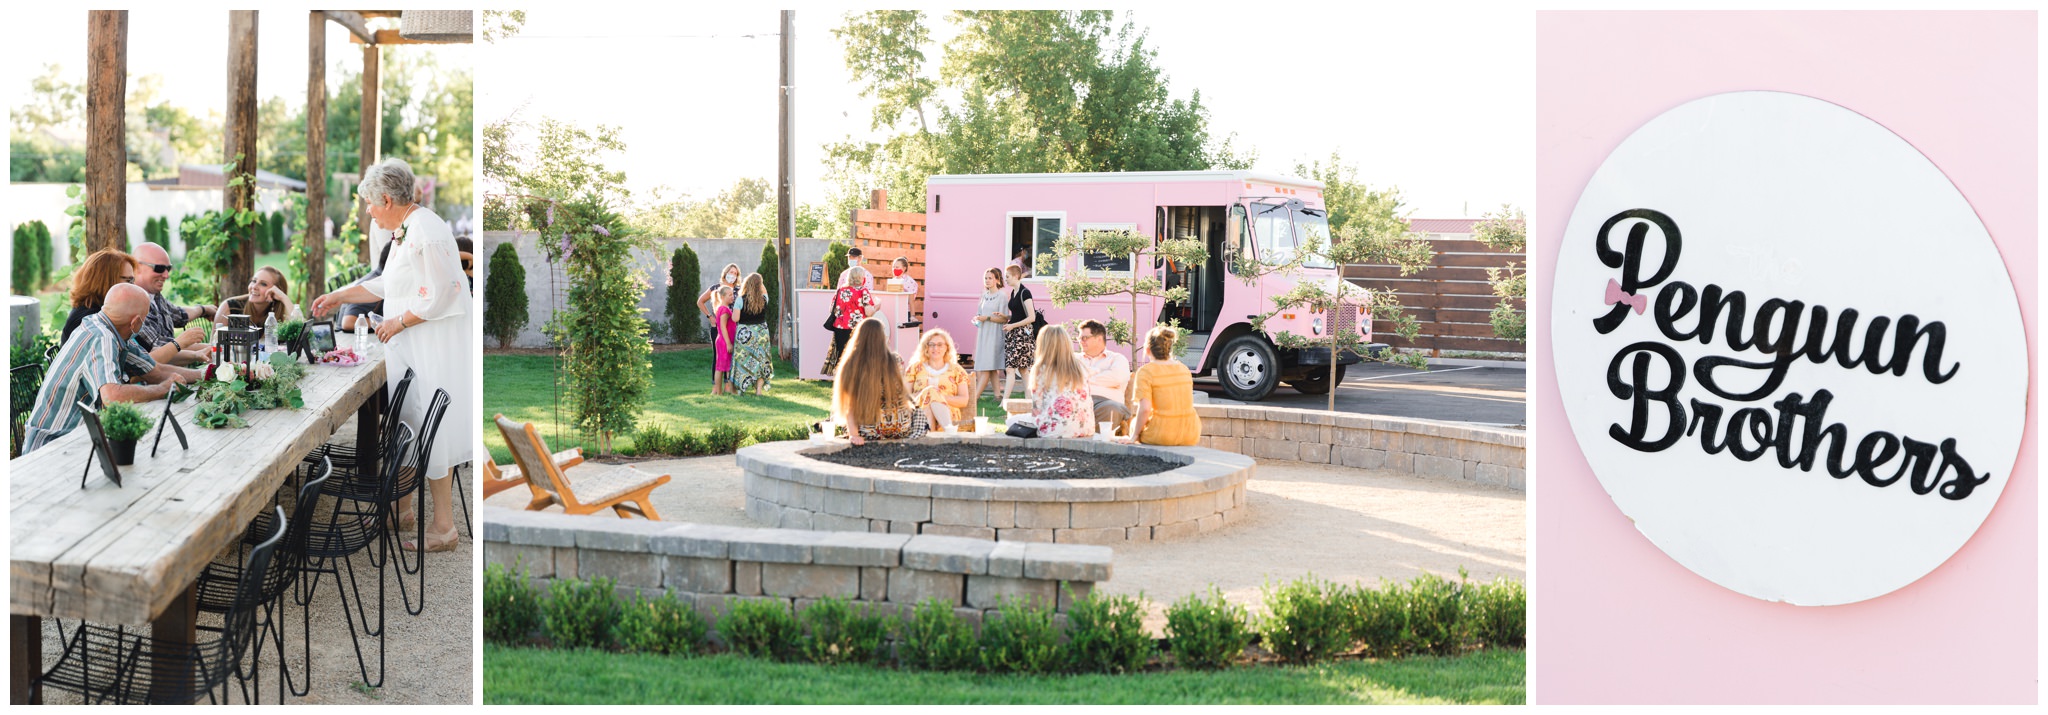 Penguin brothers pink truck for serving ice cream sandwiches at weddings in the Summer